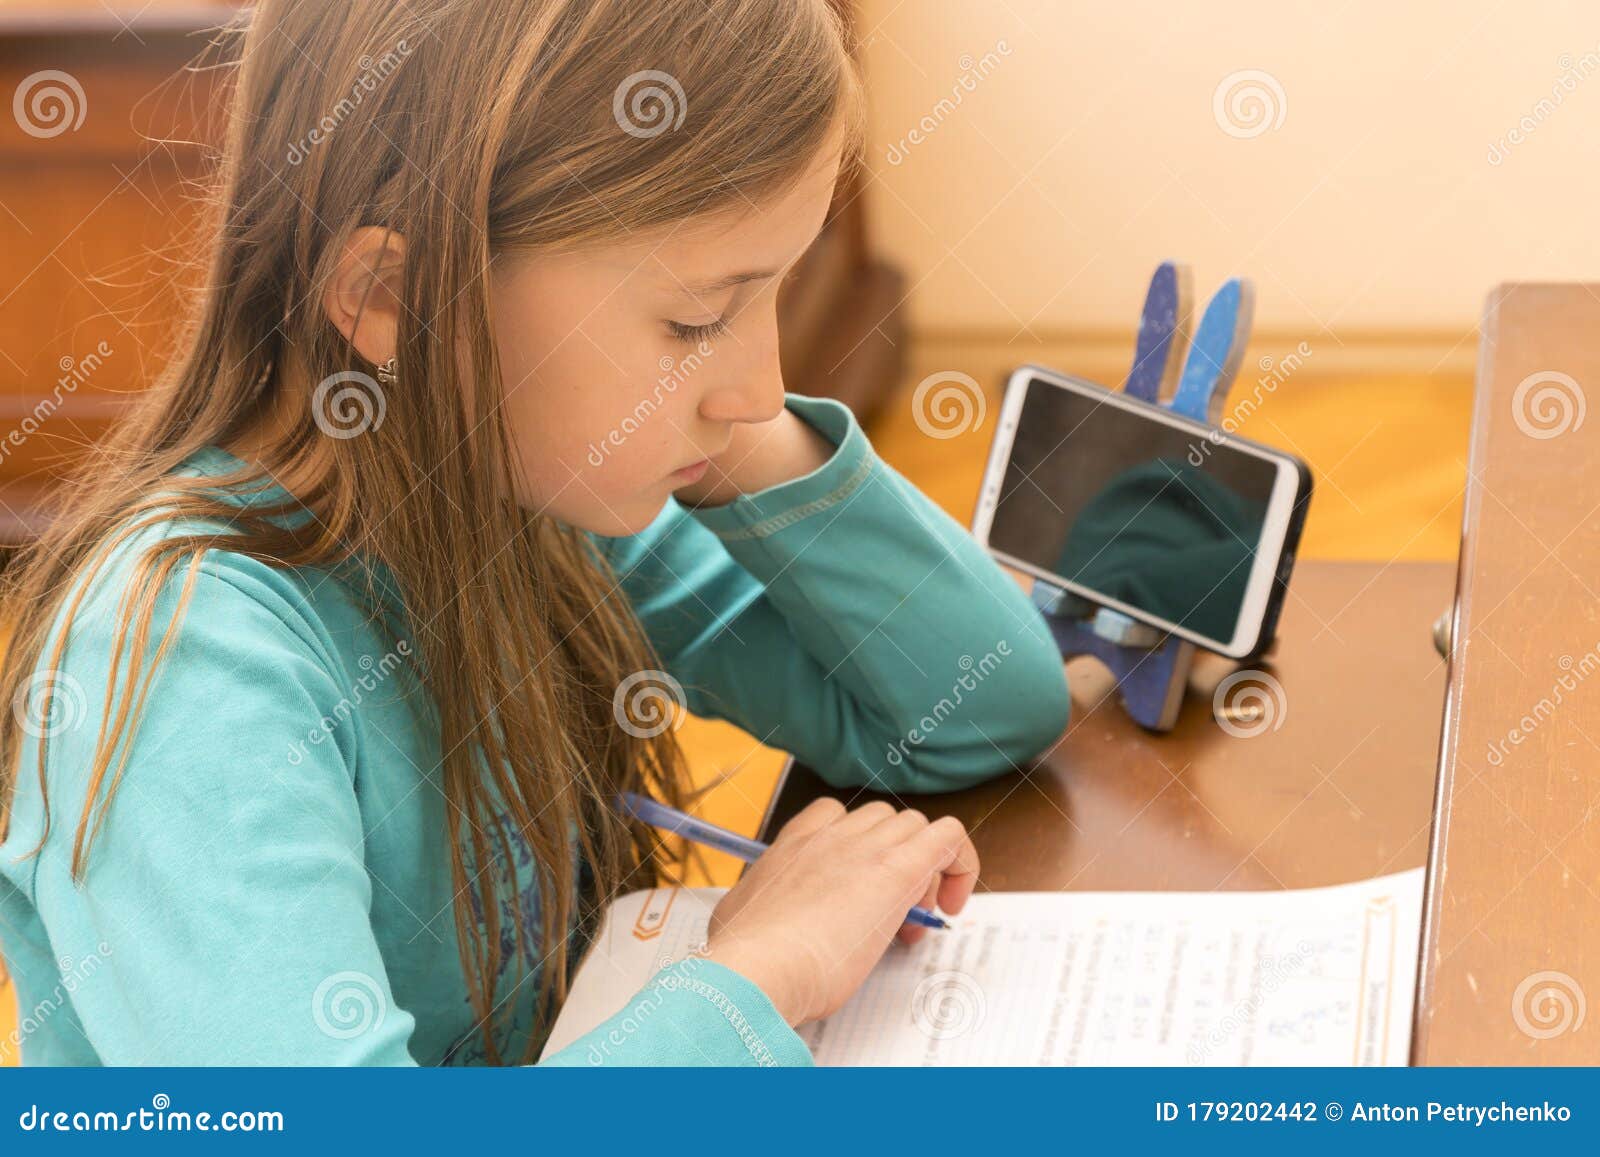 home schooling. schoolgirl studying homework math during her online lesson at home, social distance during quarantine